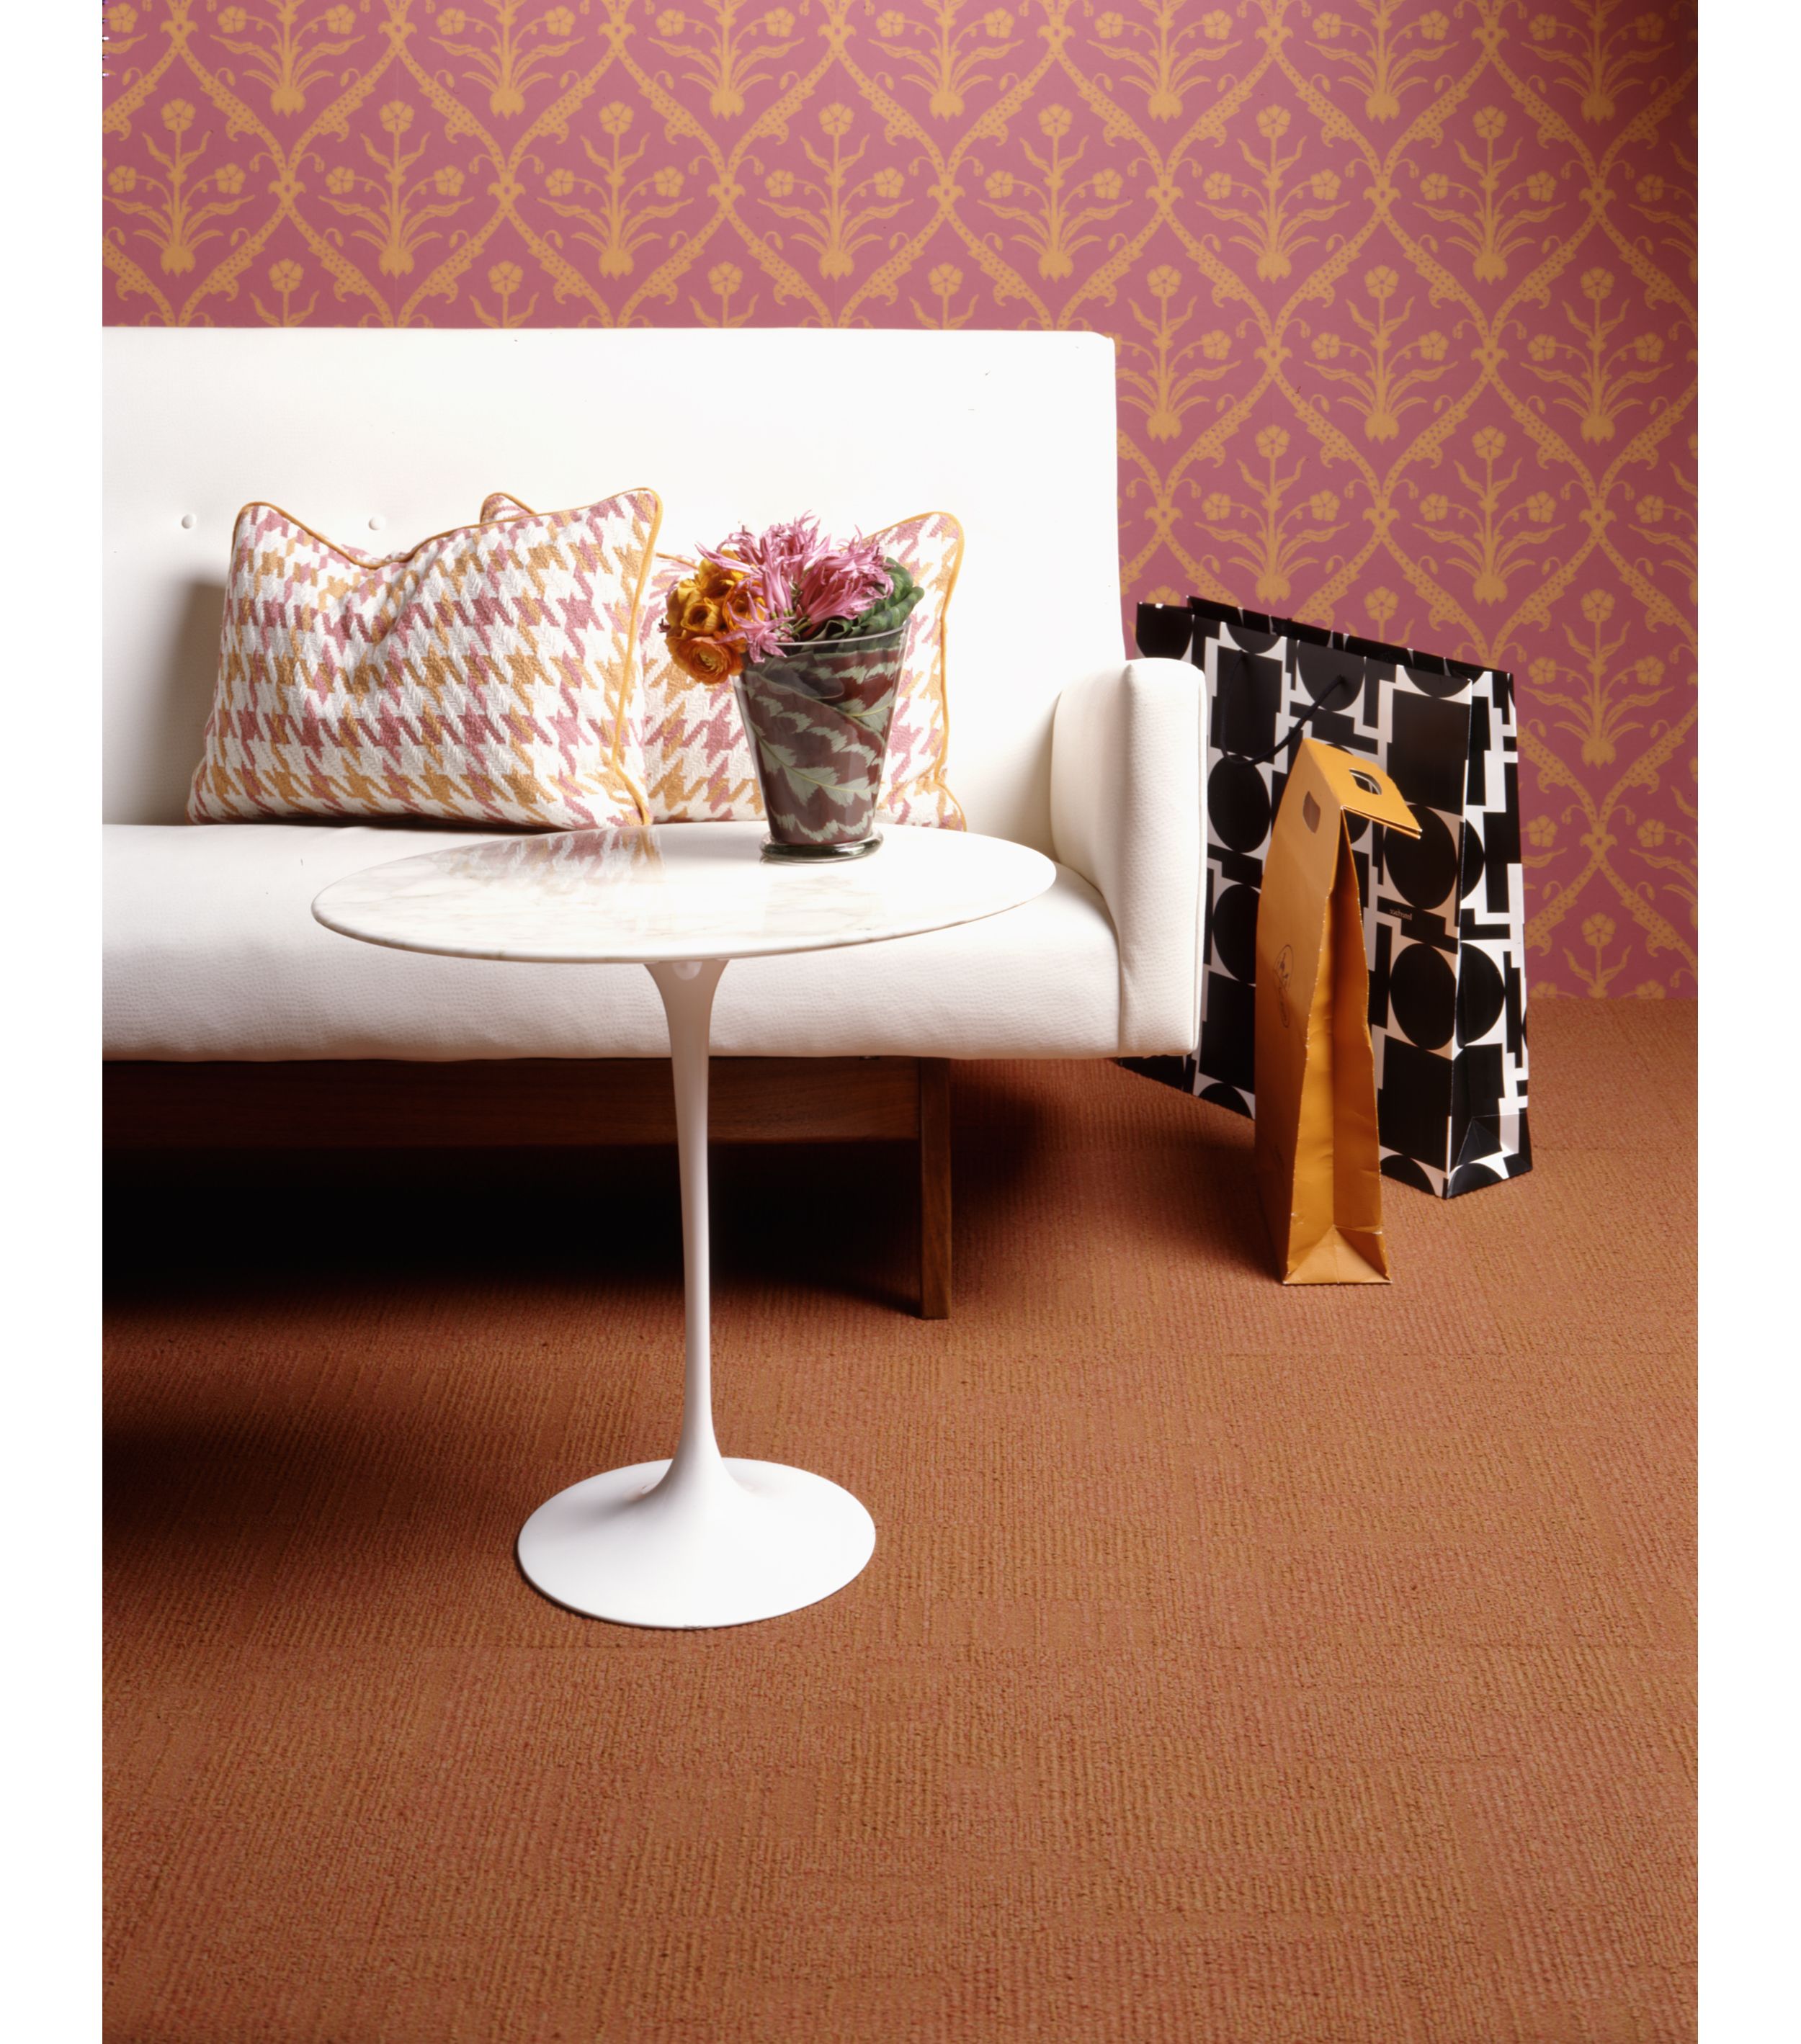 Interface Syncopation carpet tile in seating area with sofa, small whitie table with plant and shopping bags numéro d’image 9